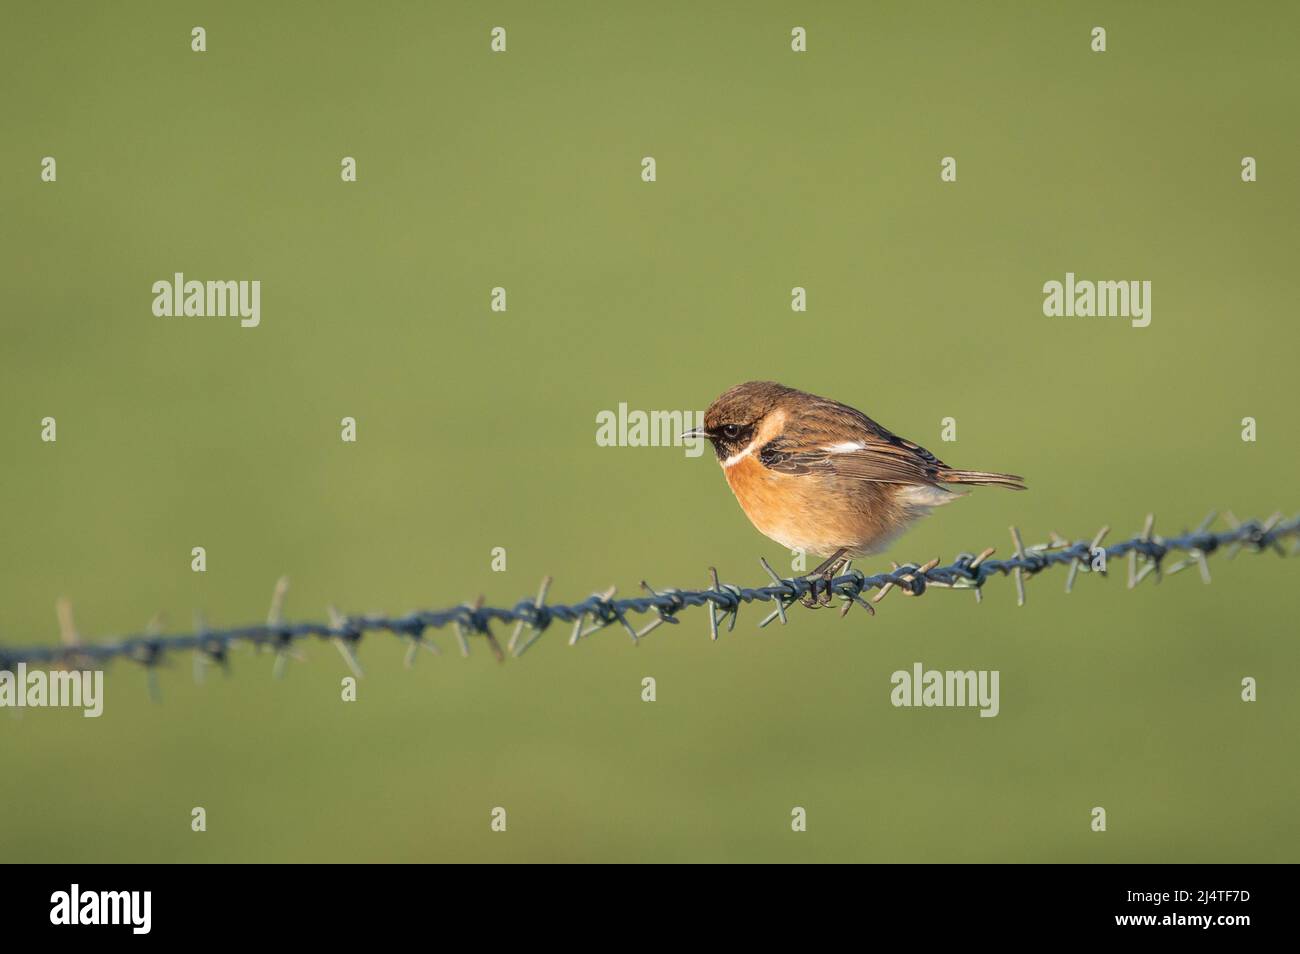 Stonechat on a strand of a barbed wire fence Stock Photo